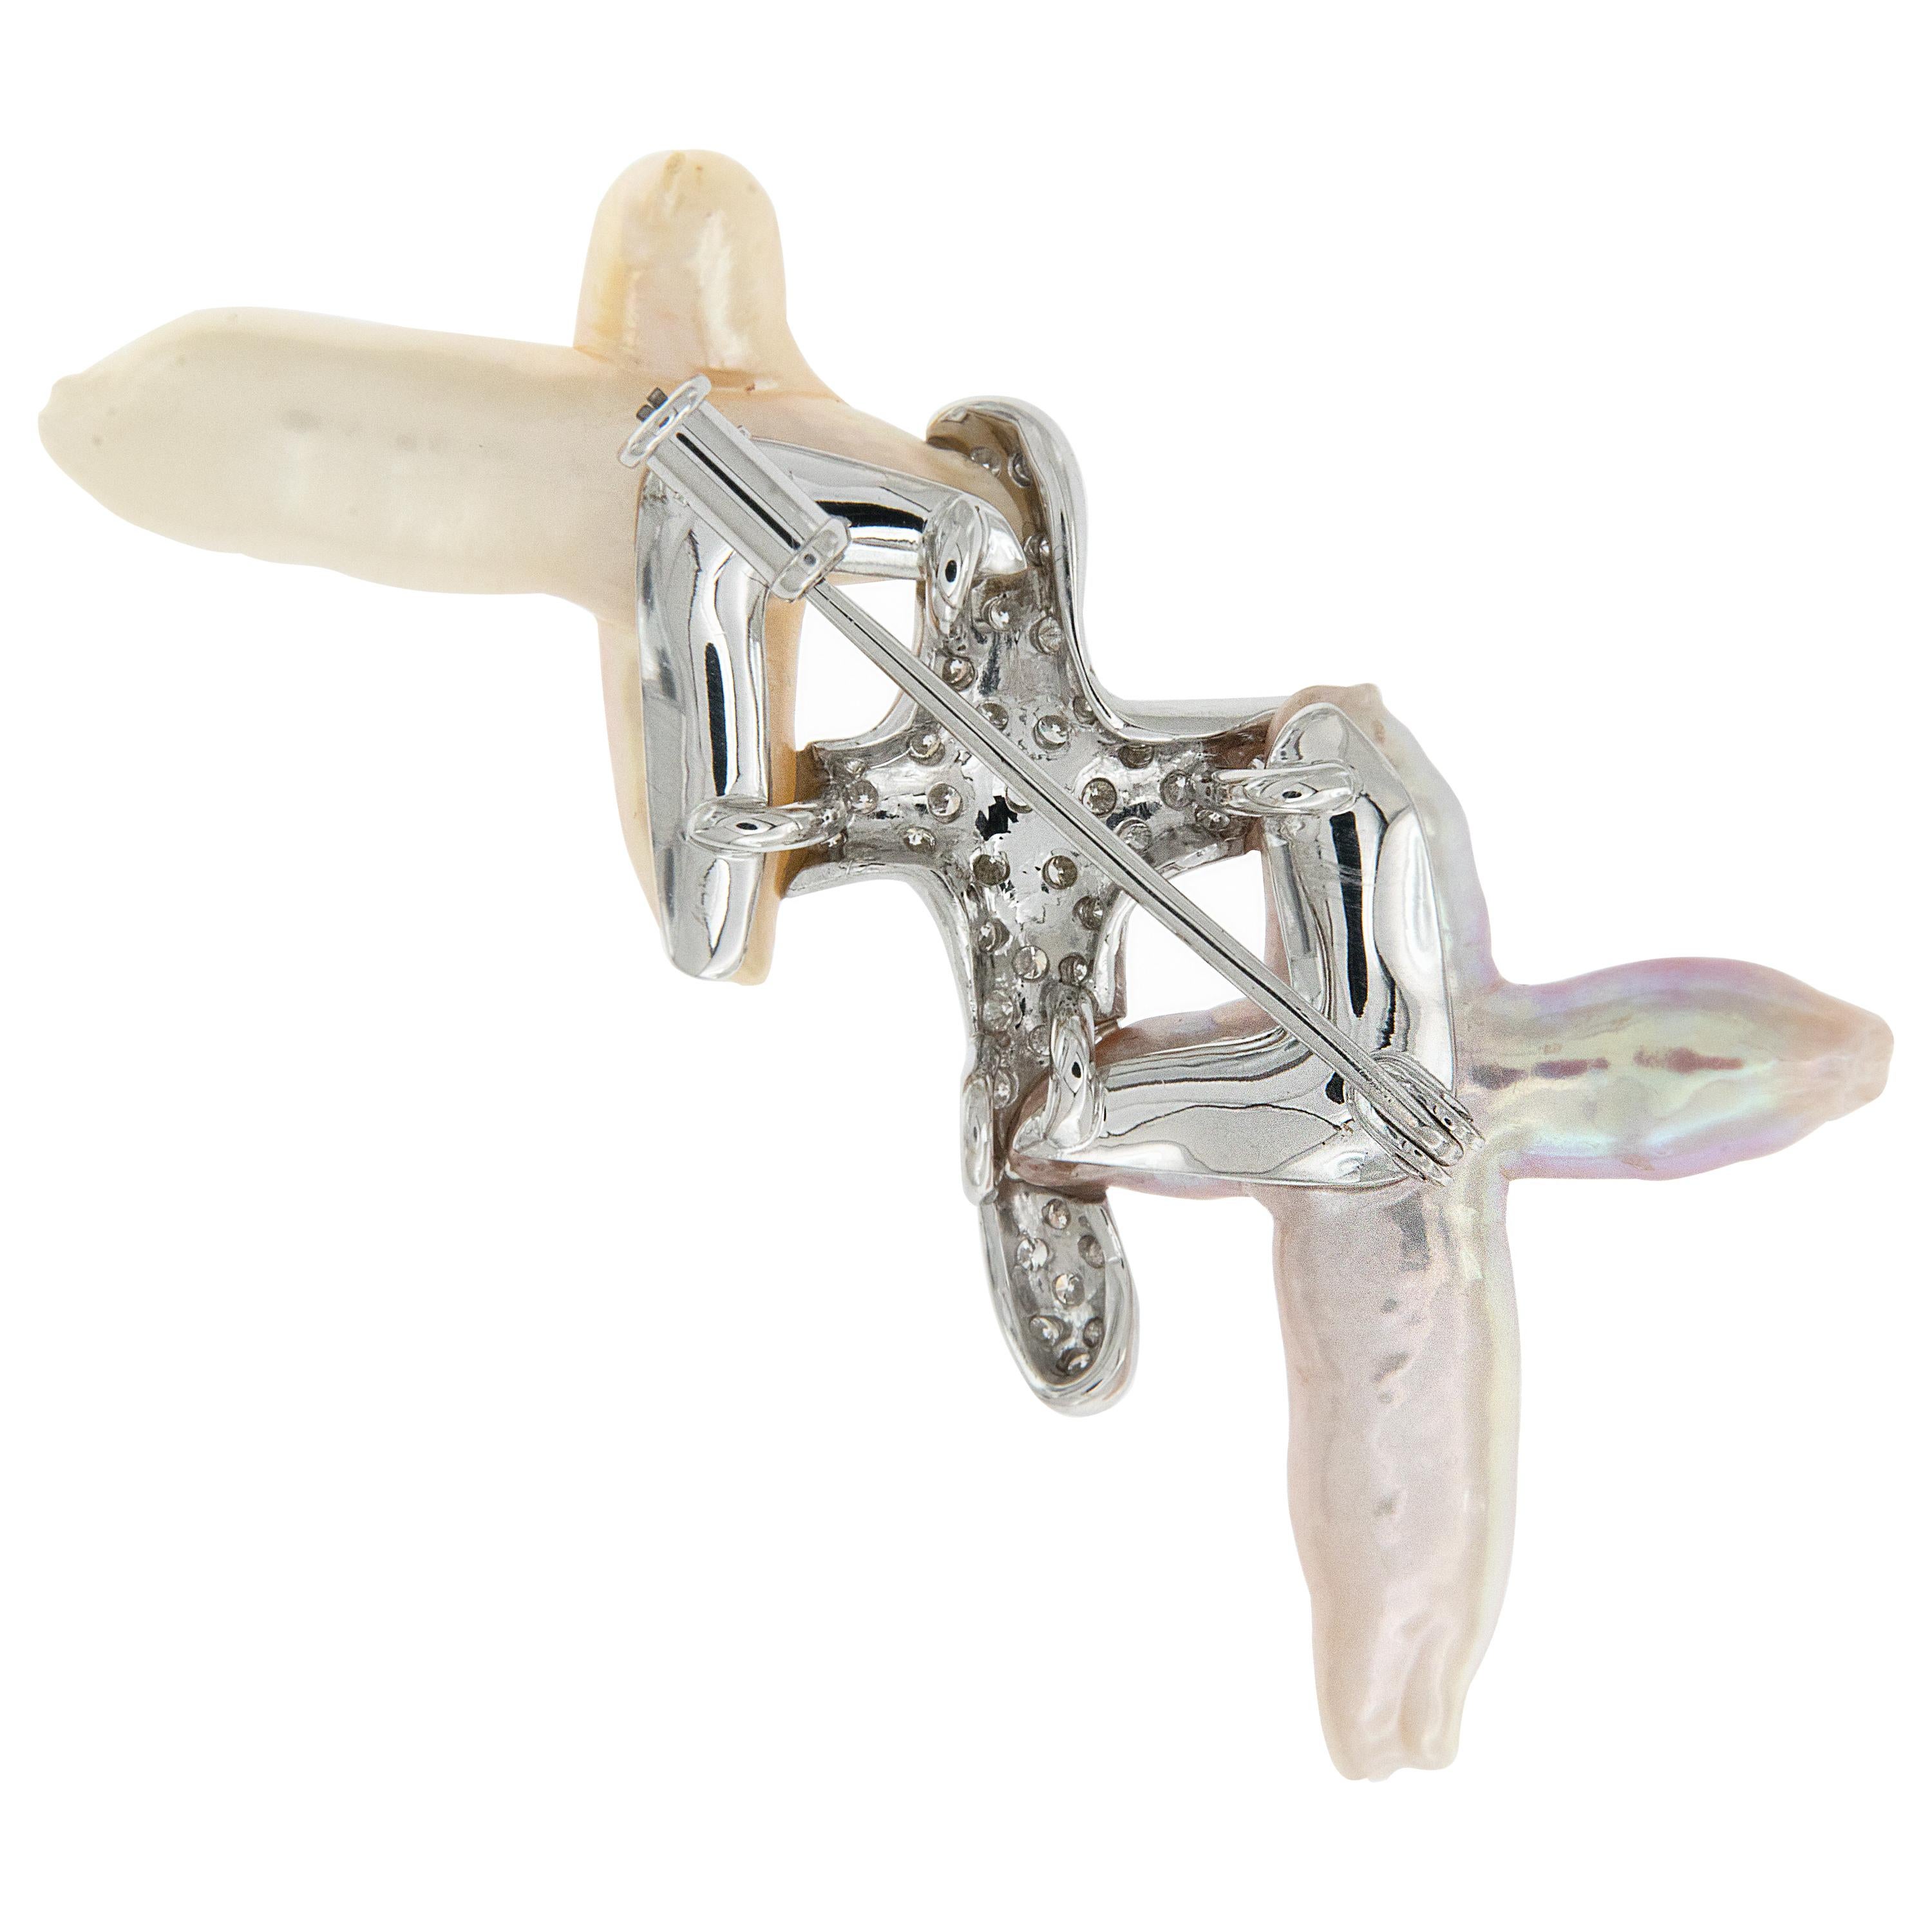 Schoeffel, a luxury brand known for their exquisite pearls for 4 generations created this eye catching brooch. Triple 